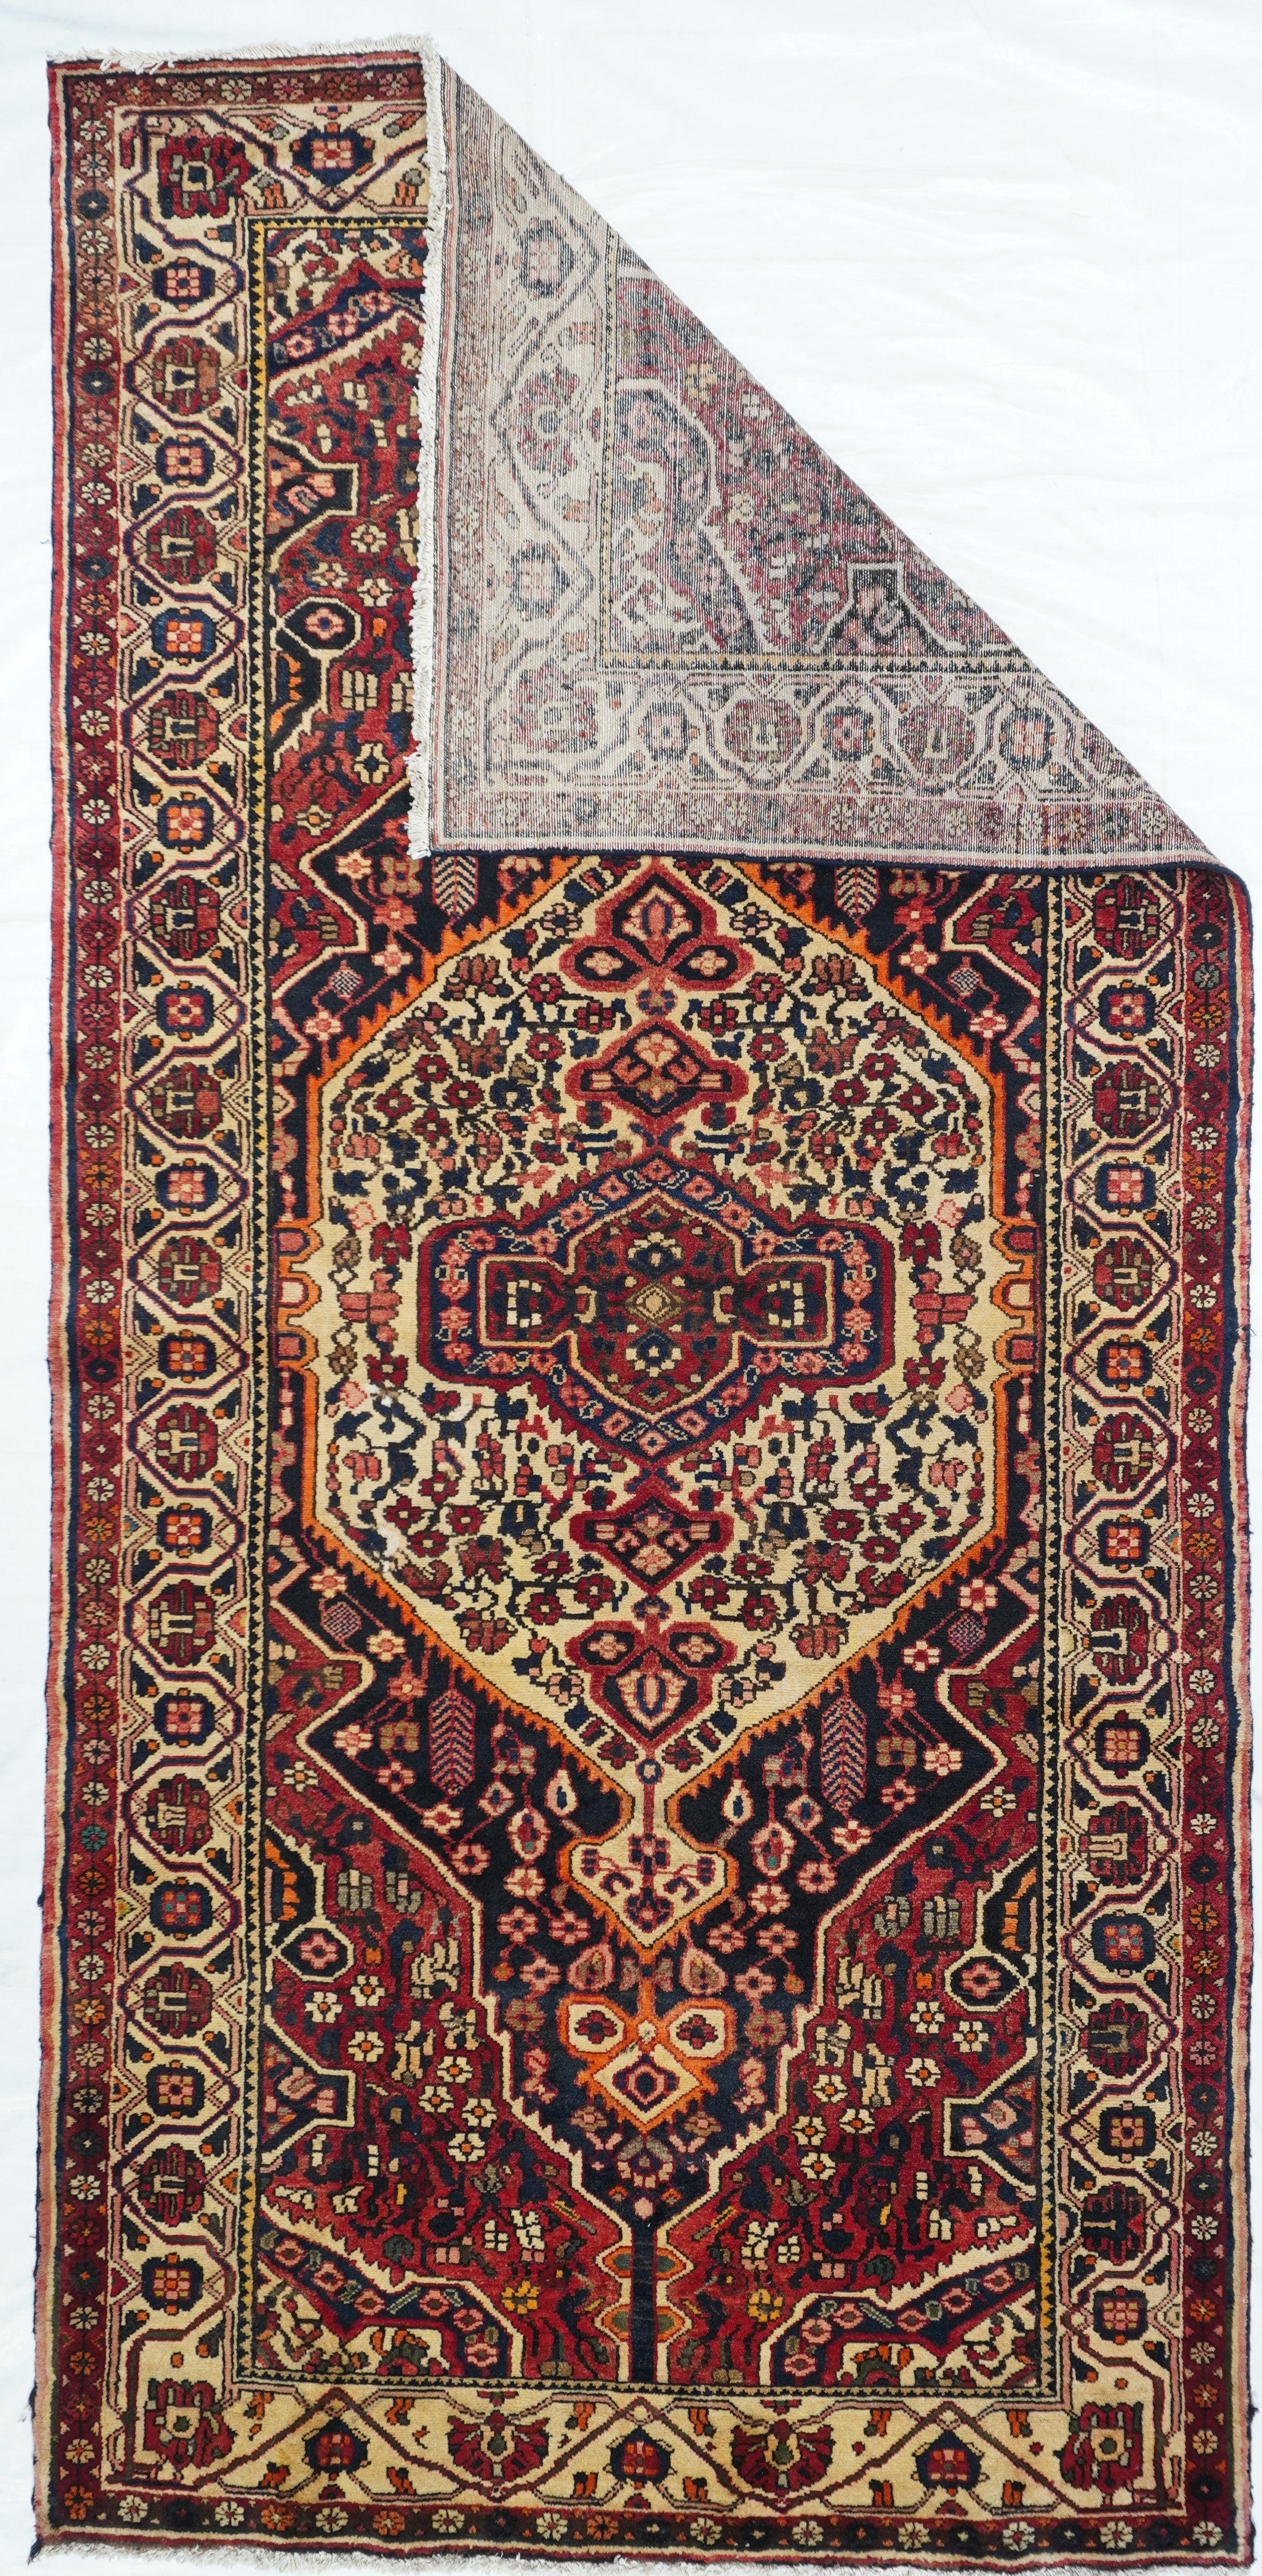 This kelegi (long rug) format Chahar Mahal rustic weaving shows a full-width, doubly pendanted ecru floral medallion, enclosing a conforming doubly pendanted sub-medallion, all on the navy field. Red extended corners and pendanted navy sub-corners.